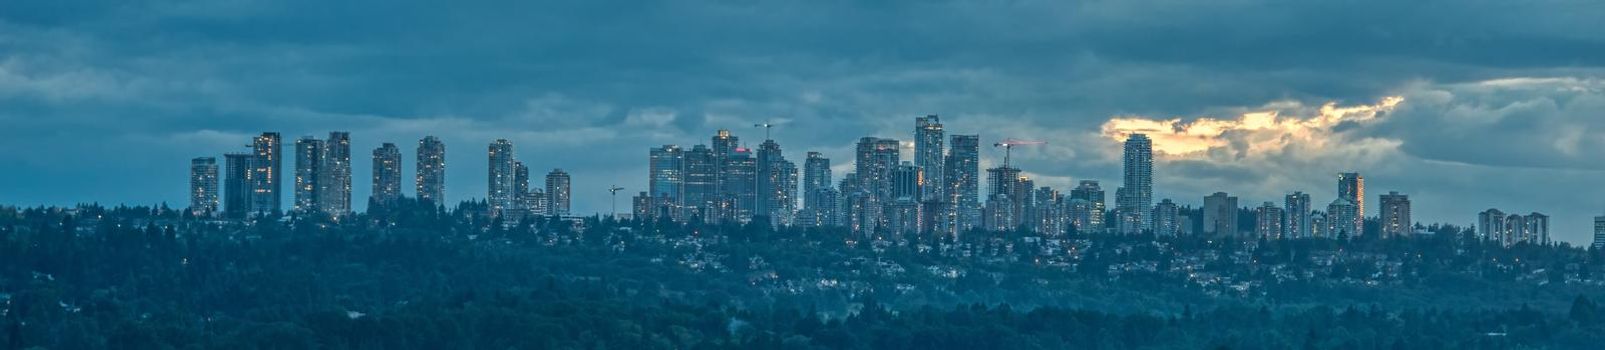 Panoramic scenery view of Metrotown cityscape over Burnaby lake on cloudy sky background